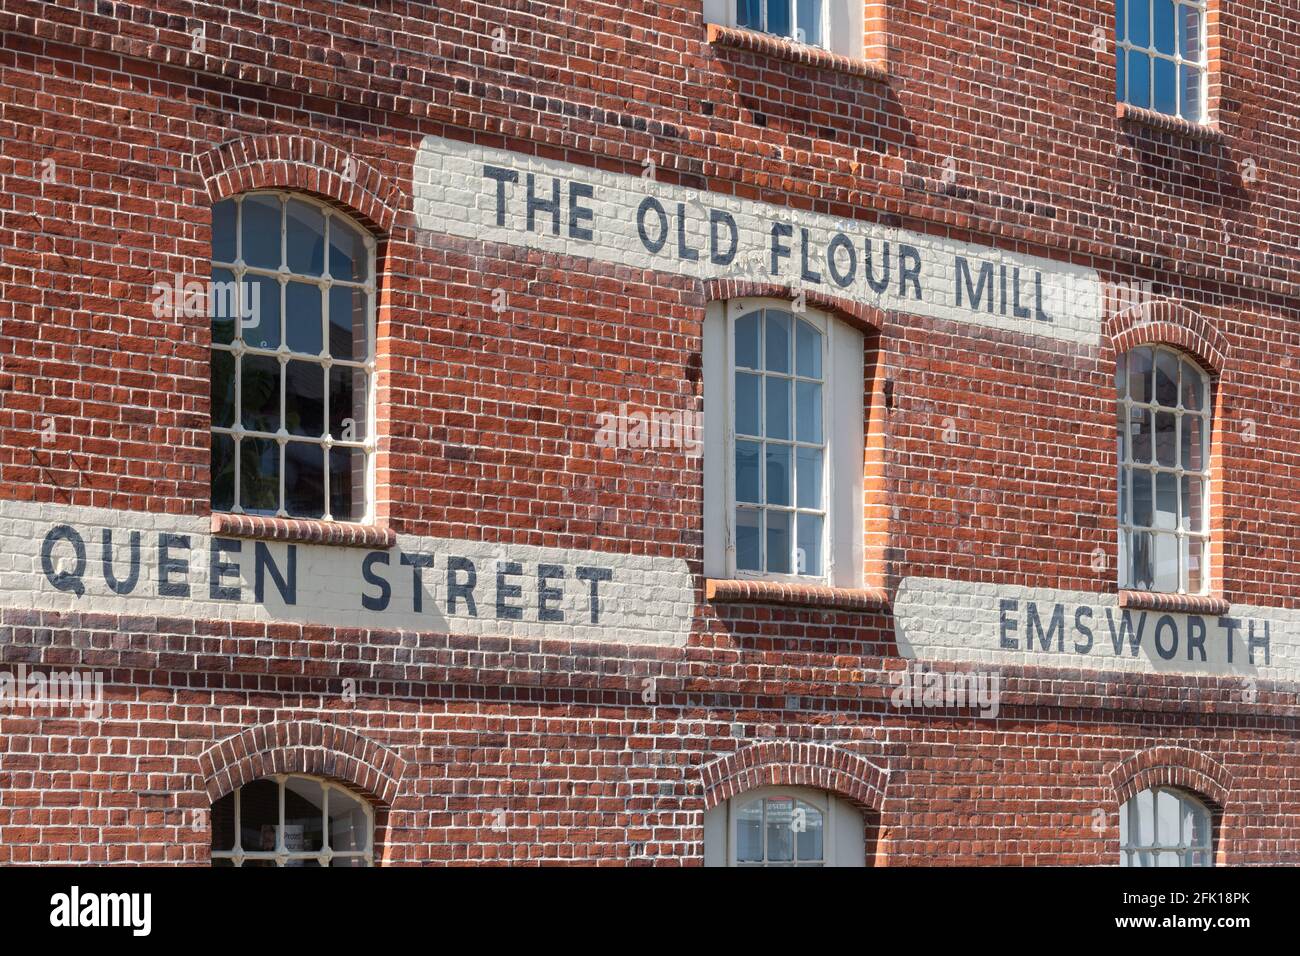 The Old Flour Mill in Emsworth, Hampshire, UK. Historic industrial building. Stock Photo